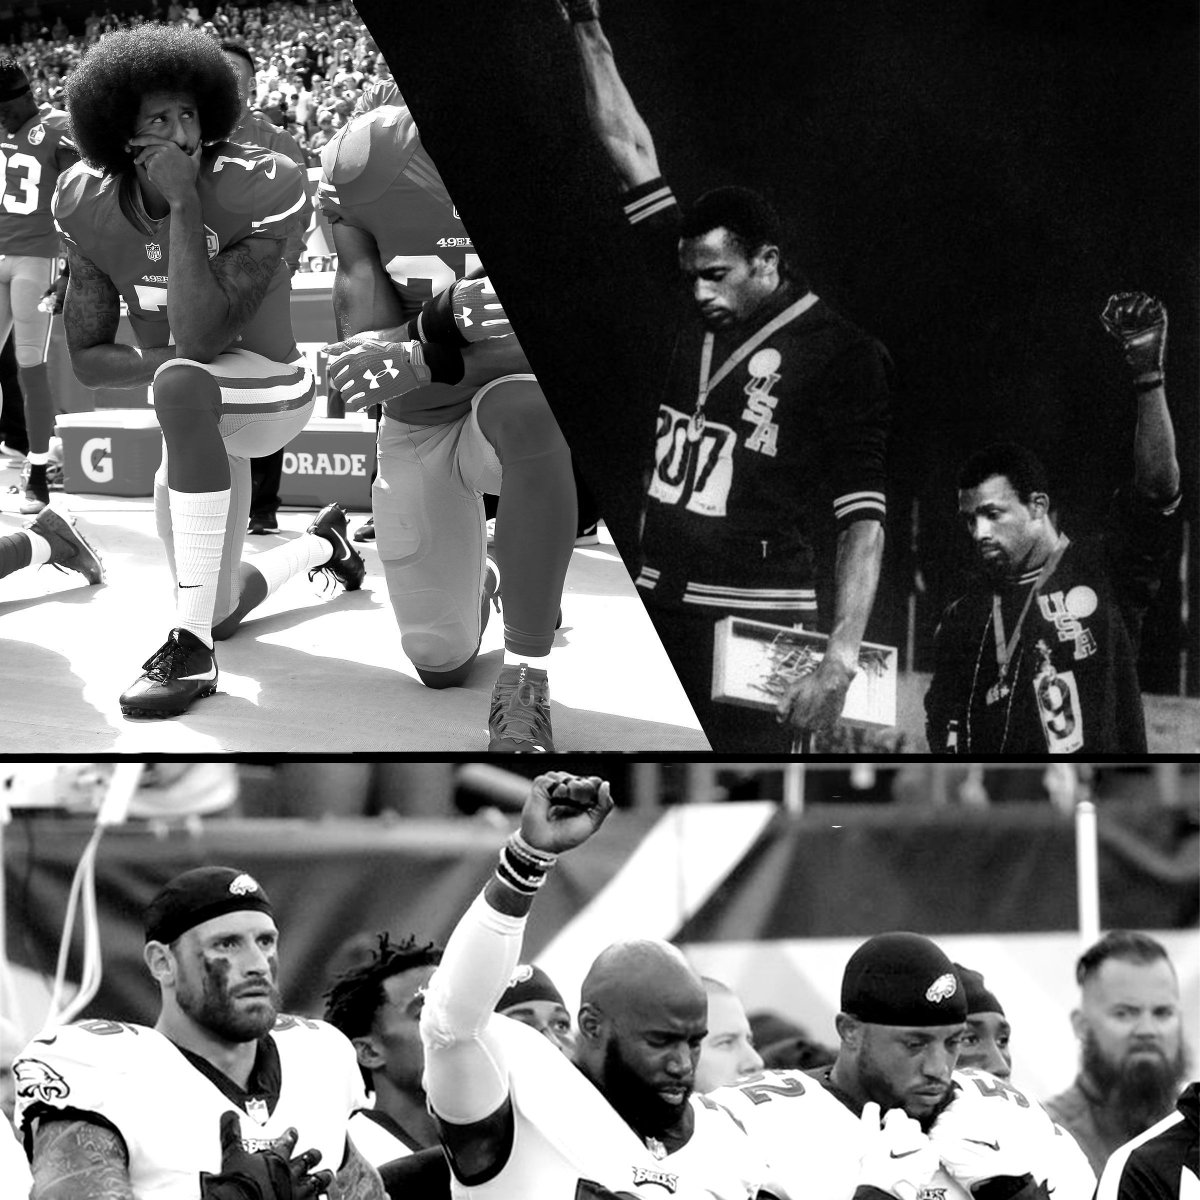 Ahead of #SuperBowlSunday tonight, let's not forget that history has shown protest is patriotic – whether you take a knee, raise a fist, sit down or stand up. 
We all love America. #BlackHistoryMonth